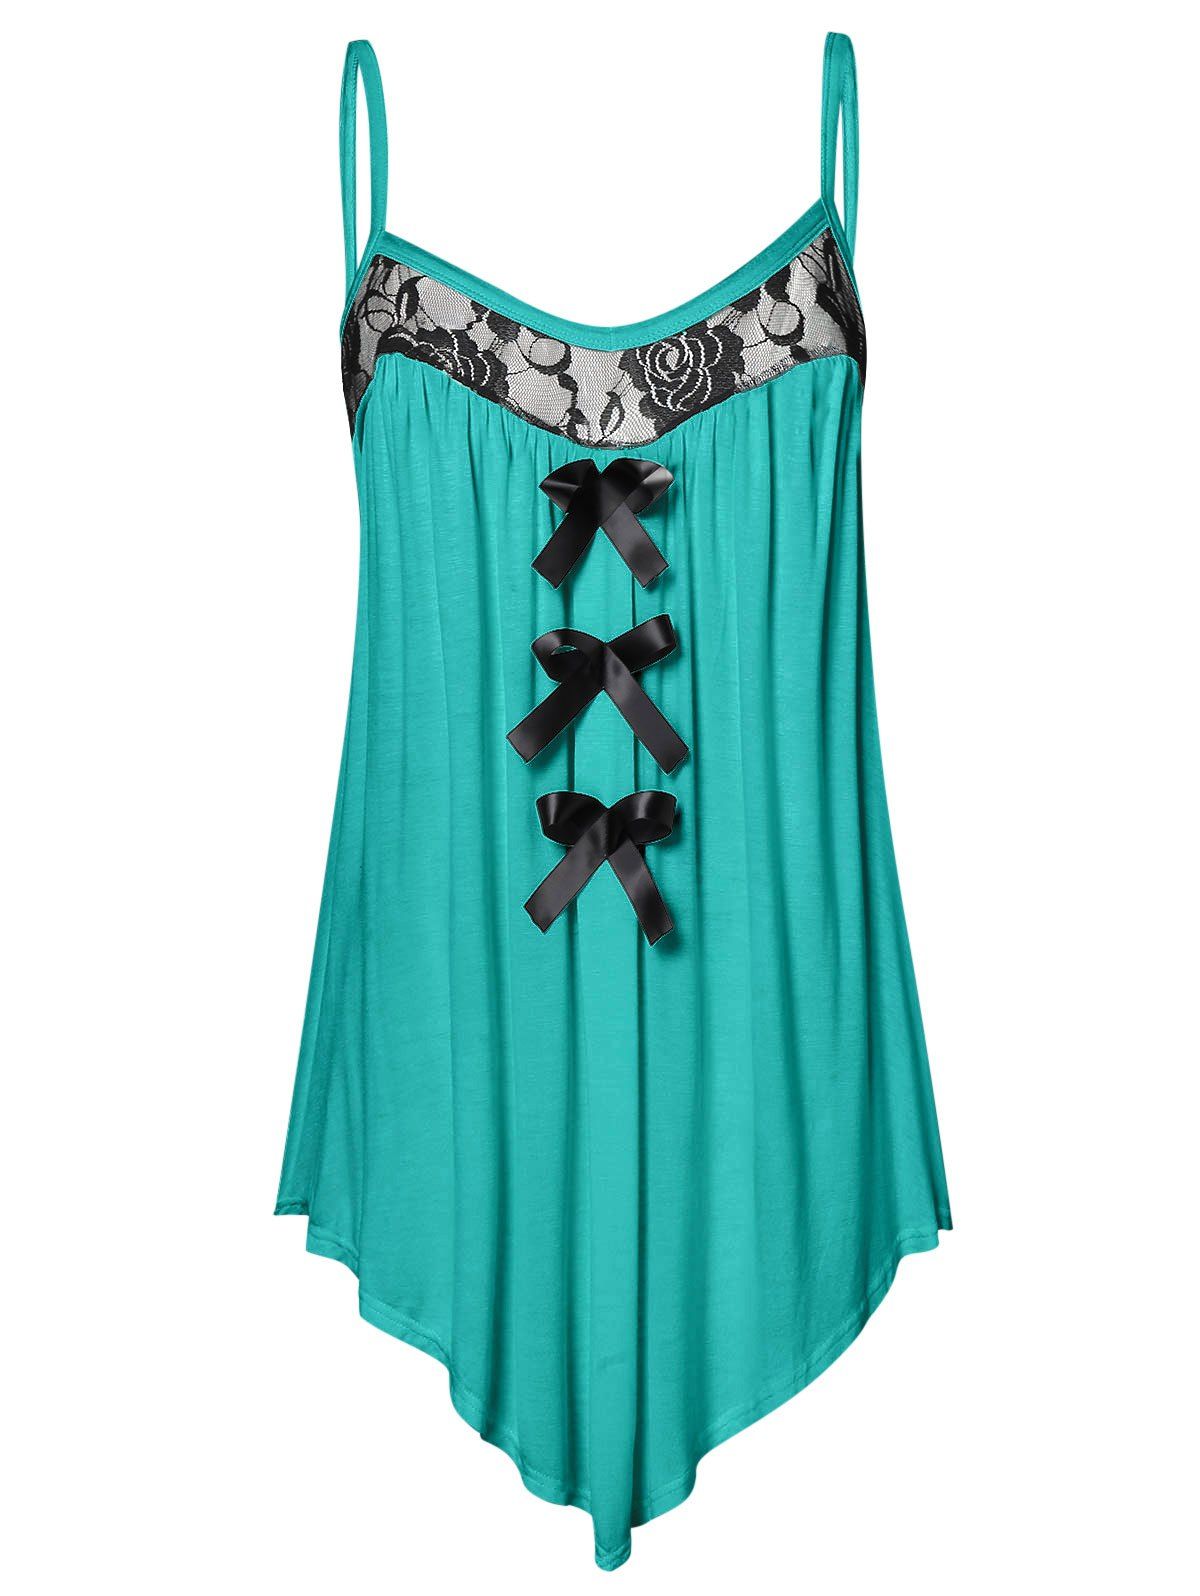 Plus Size Lace Panel Bowknot Embellished Cami Top - DARK TURQUOISE M